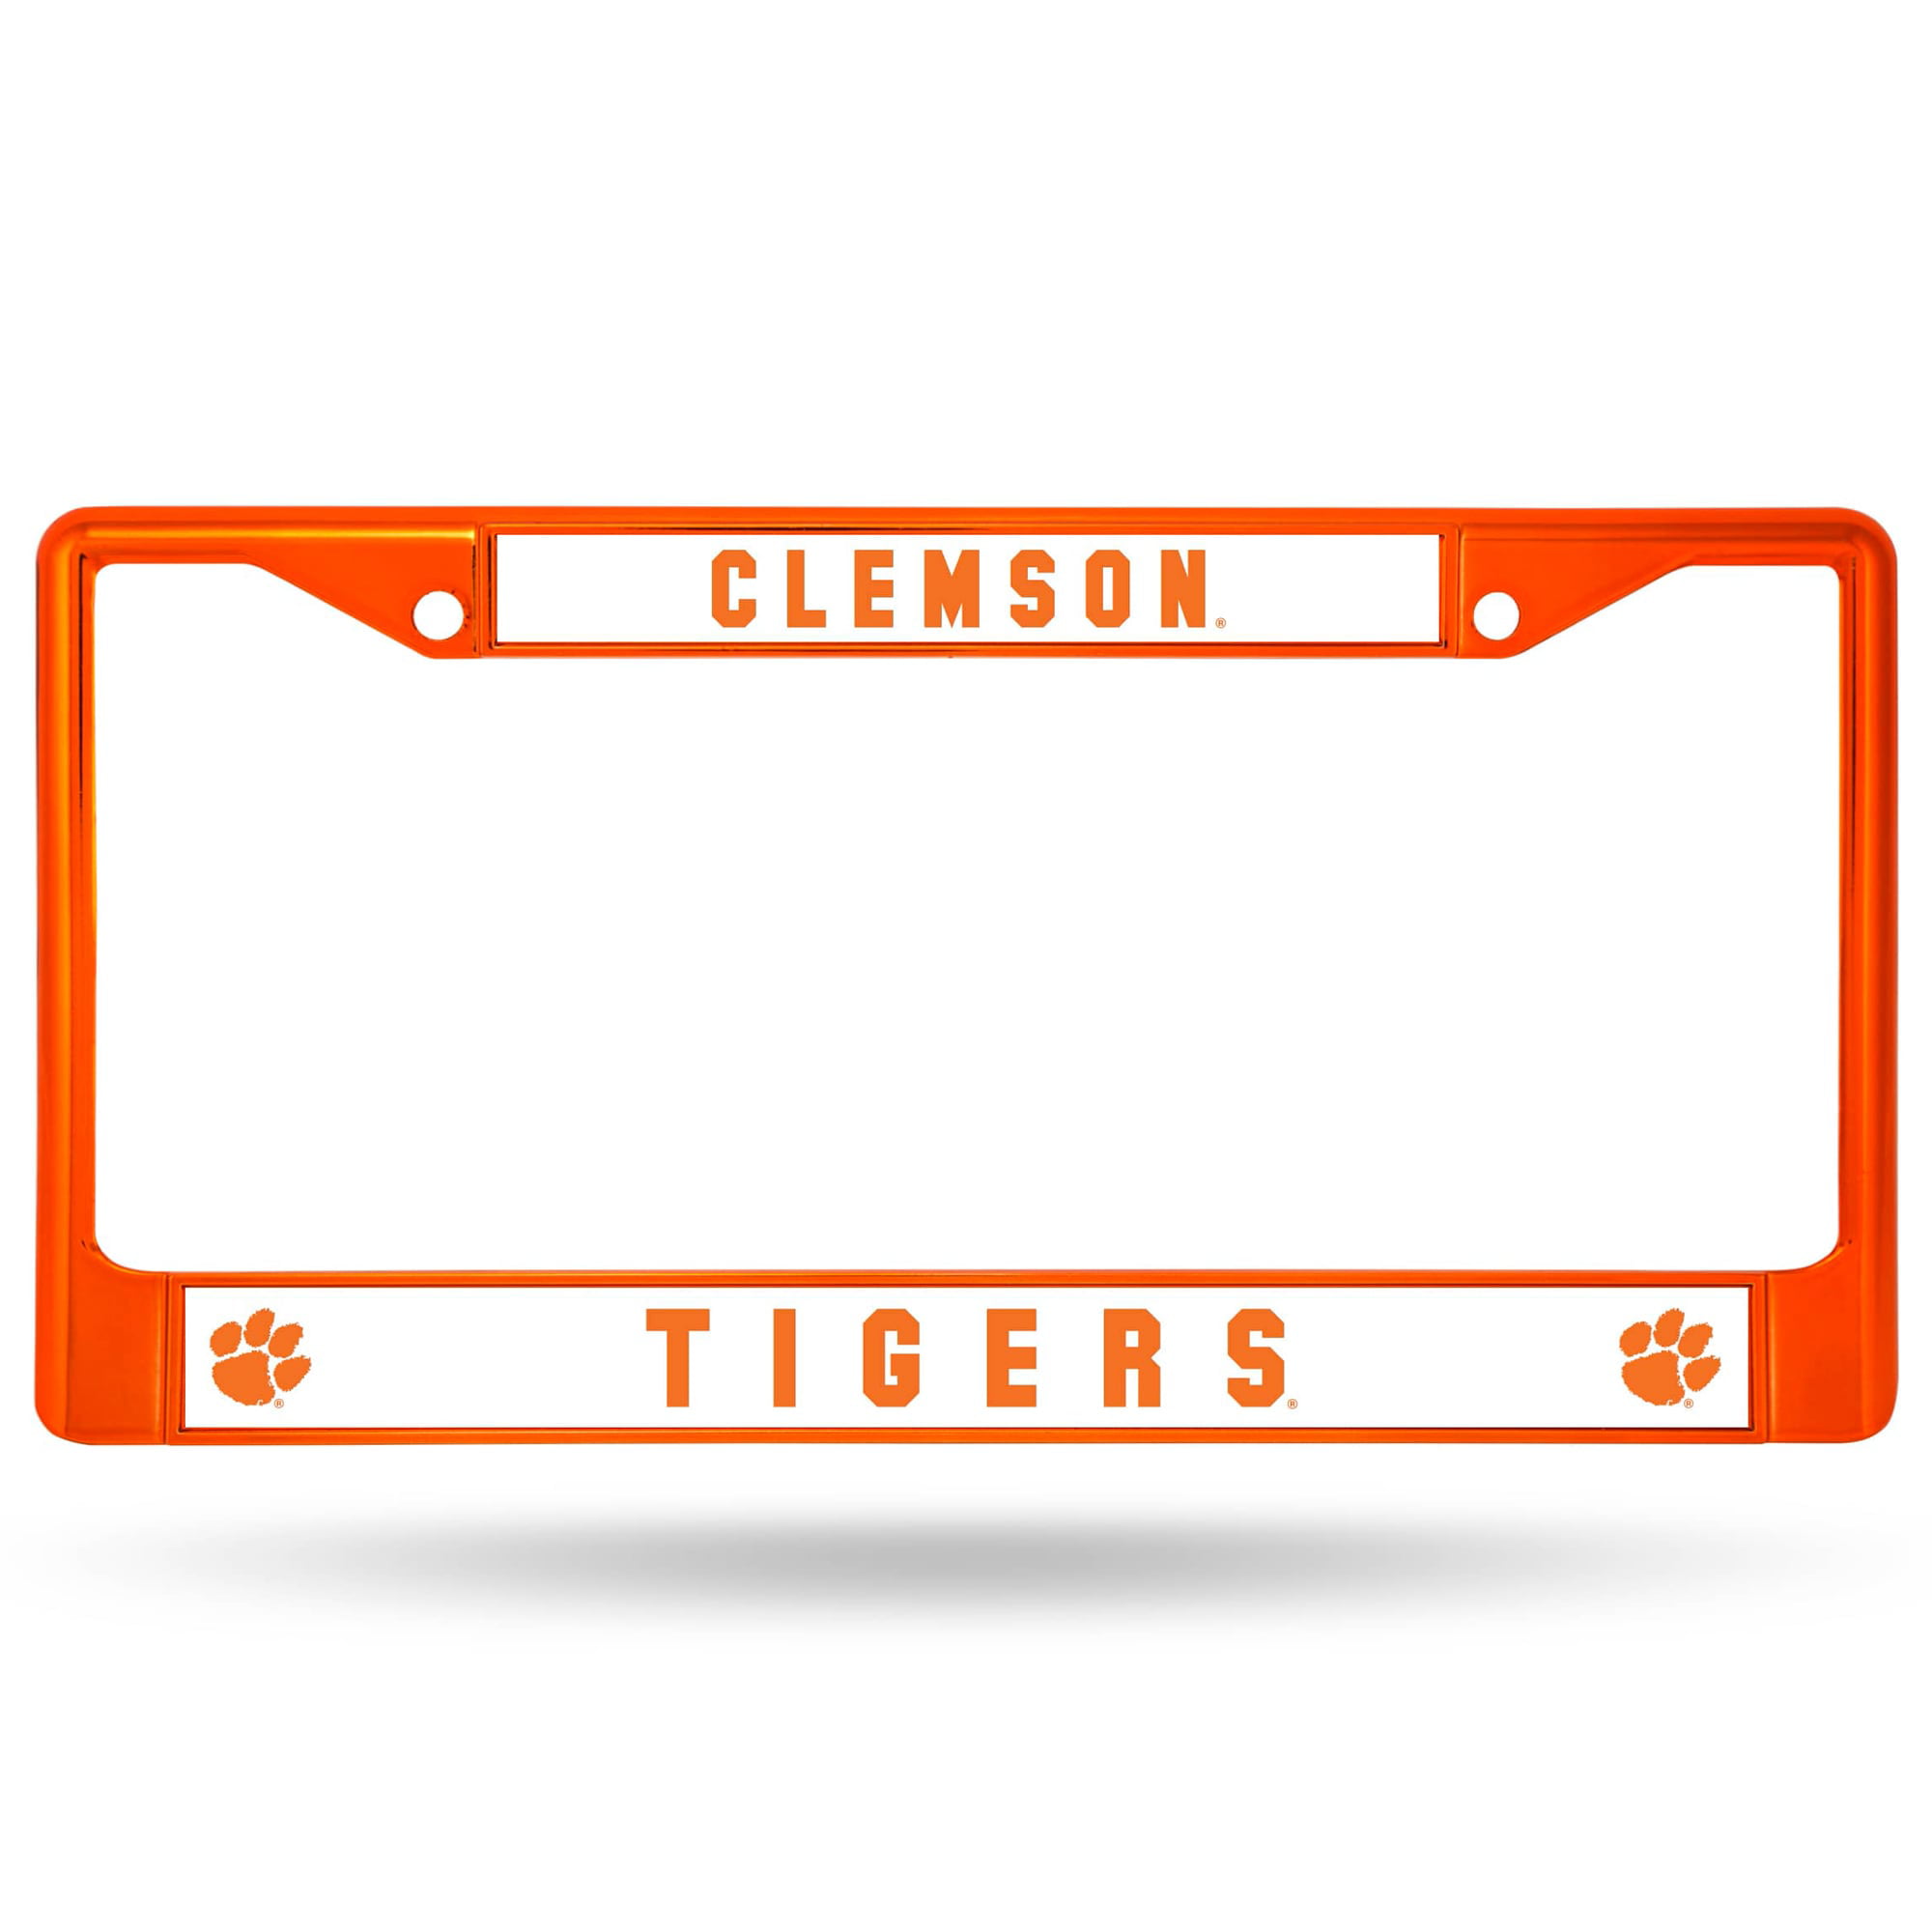 TGR FAN Clemson Tigers License Plate Tag Wall Sign Car Truck Auto FAST SHIP 